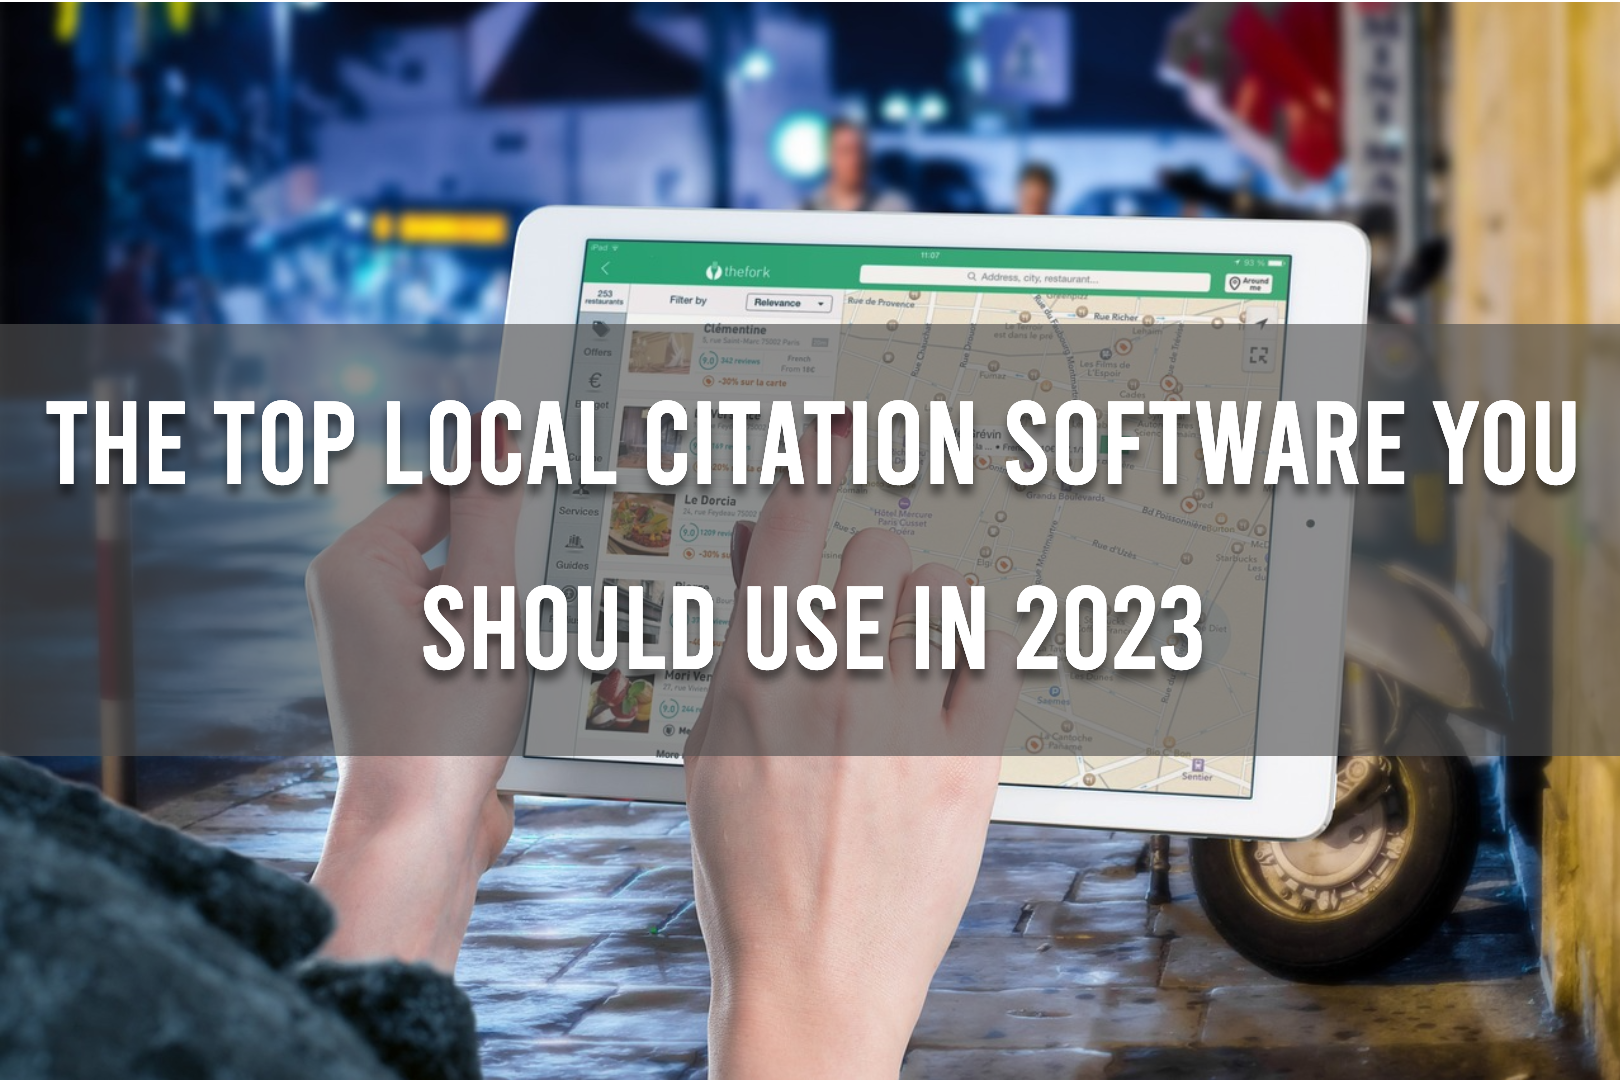 The Top Local Citation Software You Should Use in